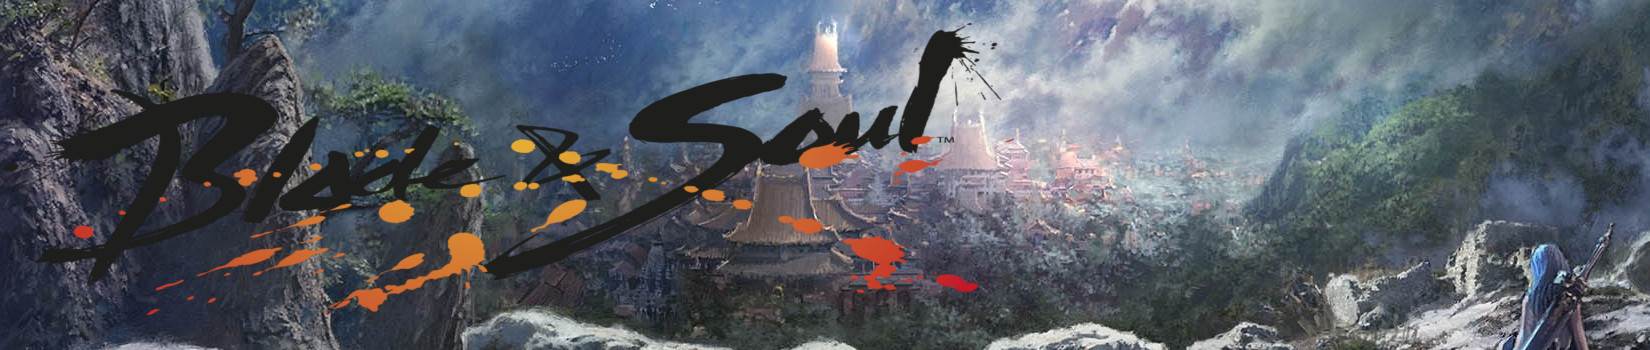 Blade and soul Gold